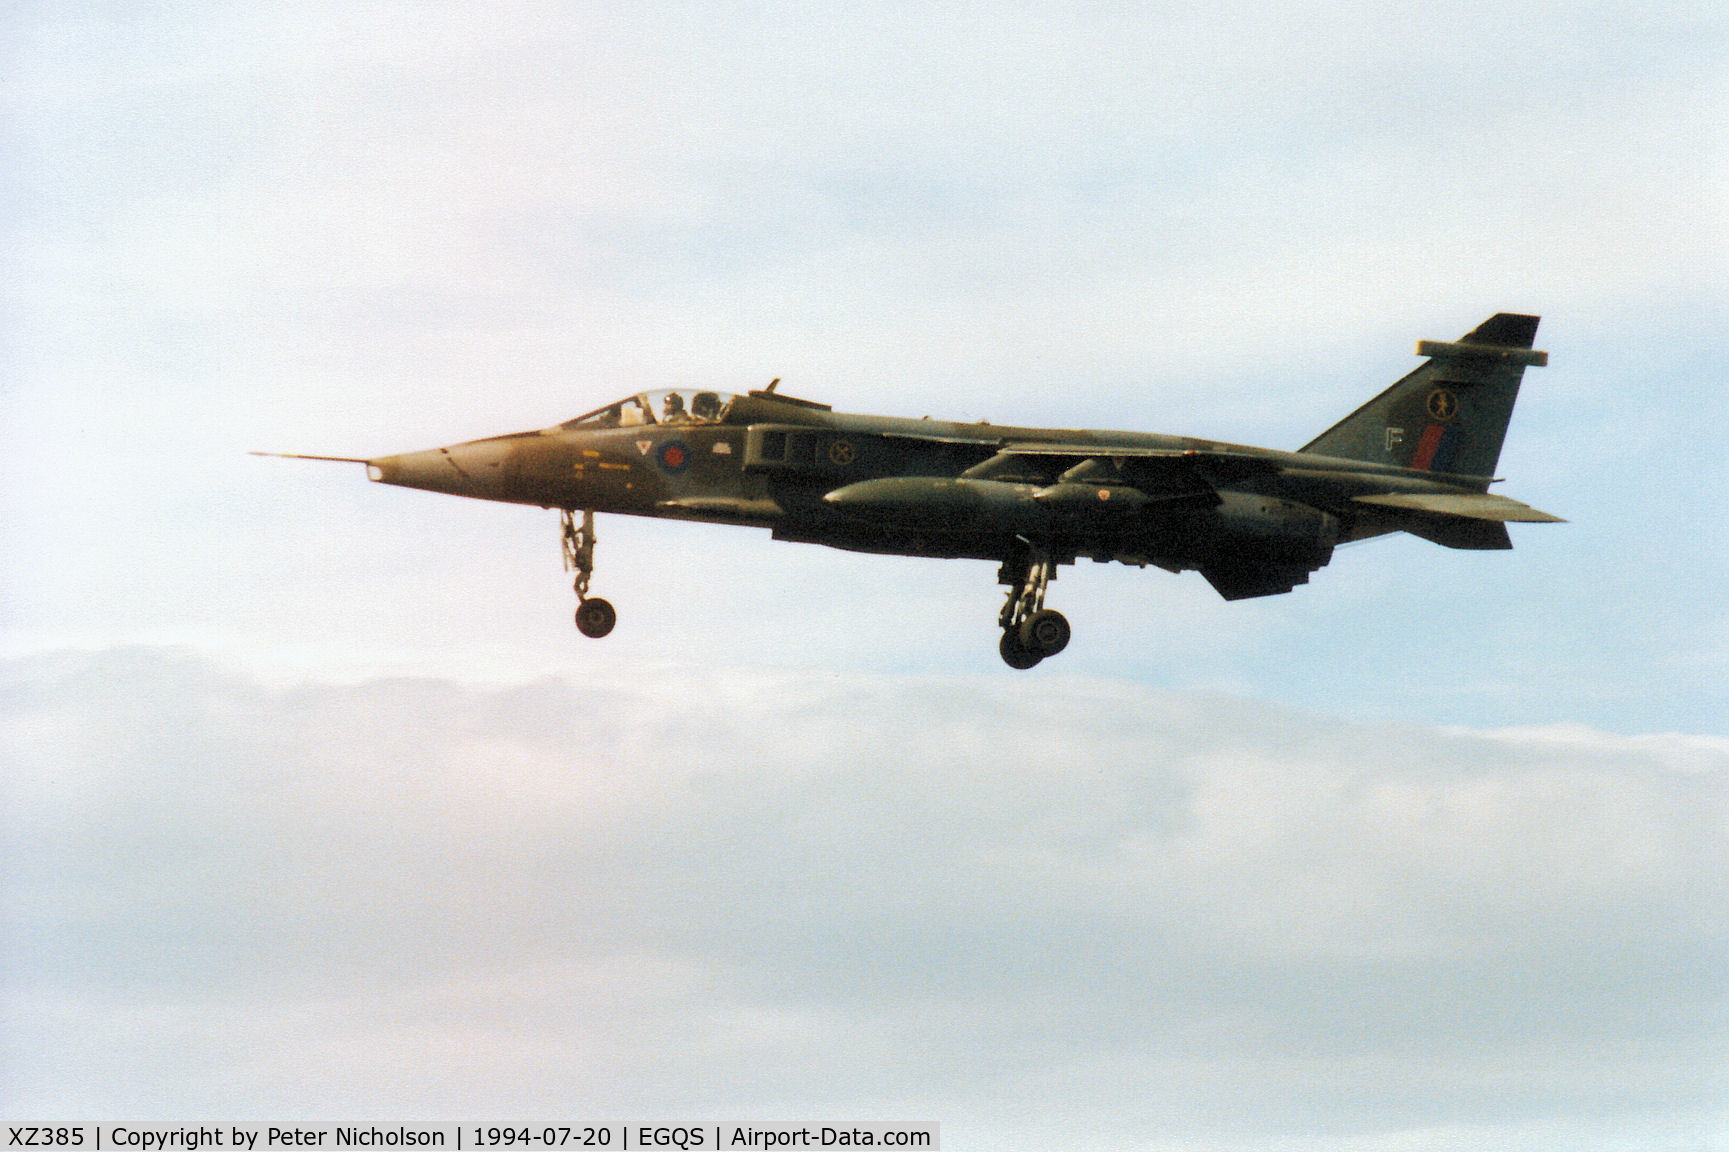 XZ385, 1977 Sepecat Jaguar GR.1A C/N S.150, Jaguar GR.1A of 16[Reserve] Squadron on final approach to RAF Lossiemouth in the Summer of 1994.